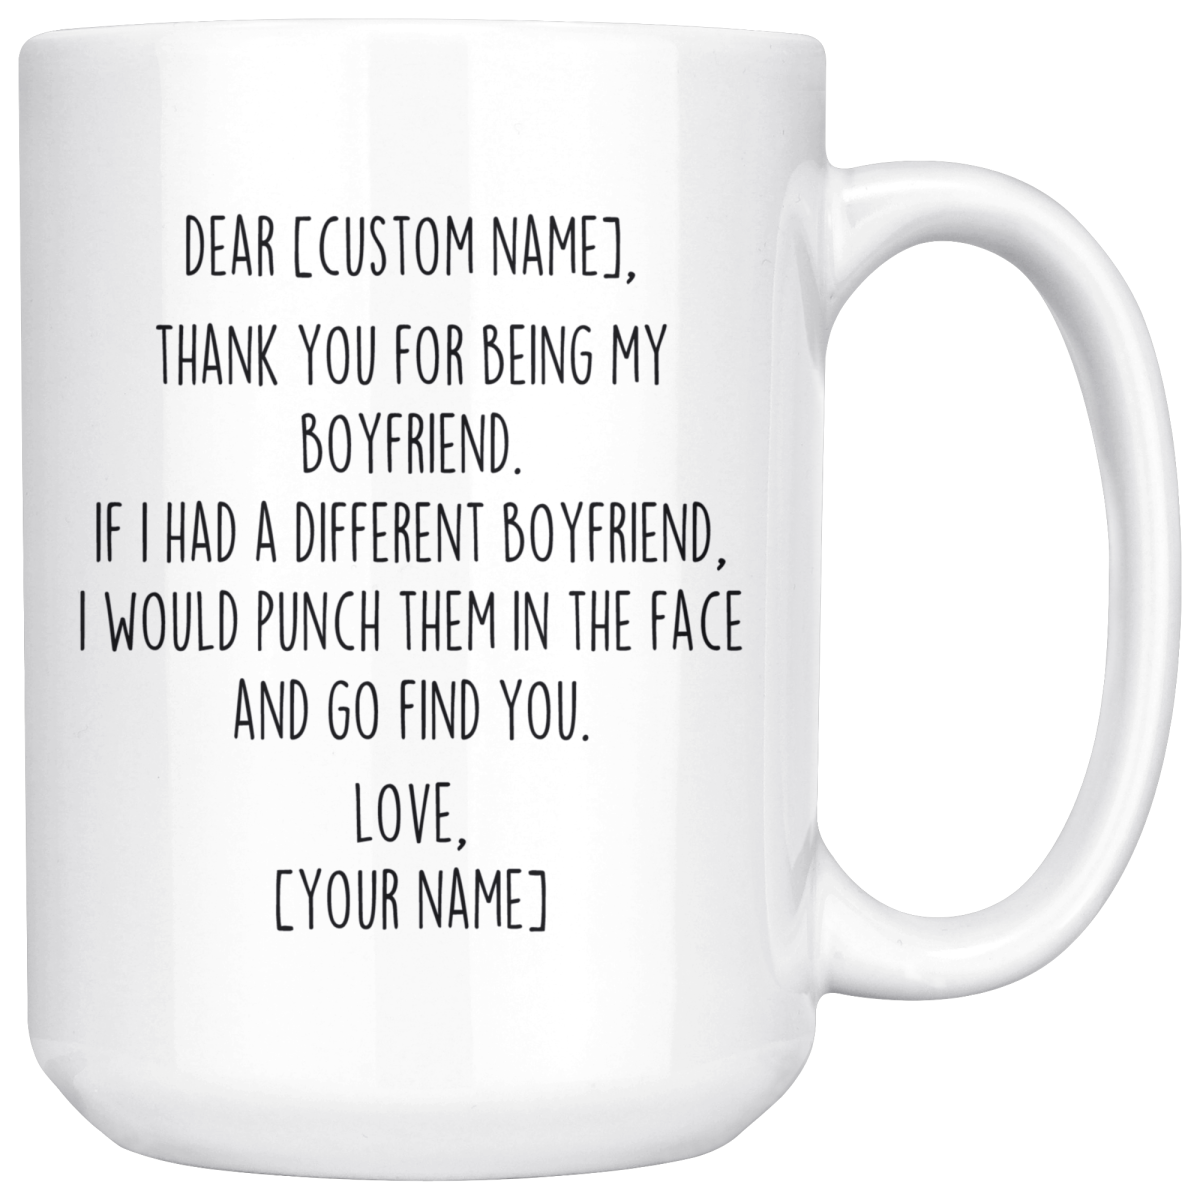 Customized Gifts For Boyfriend